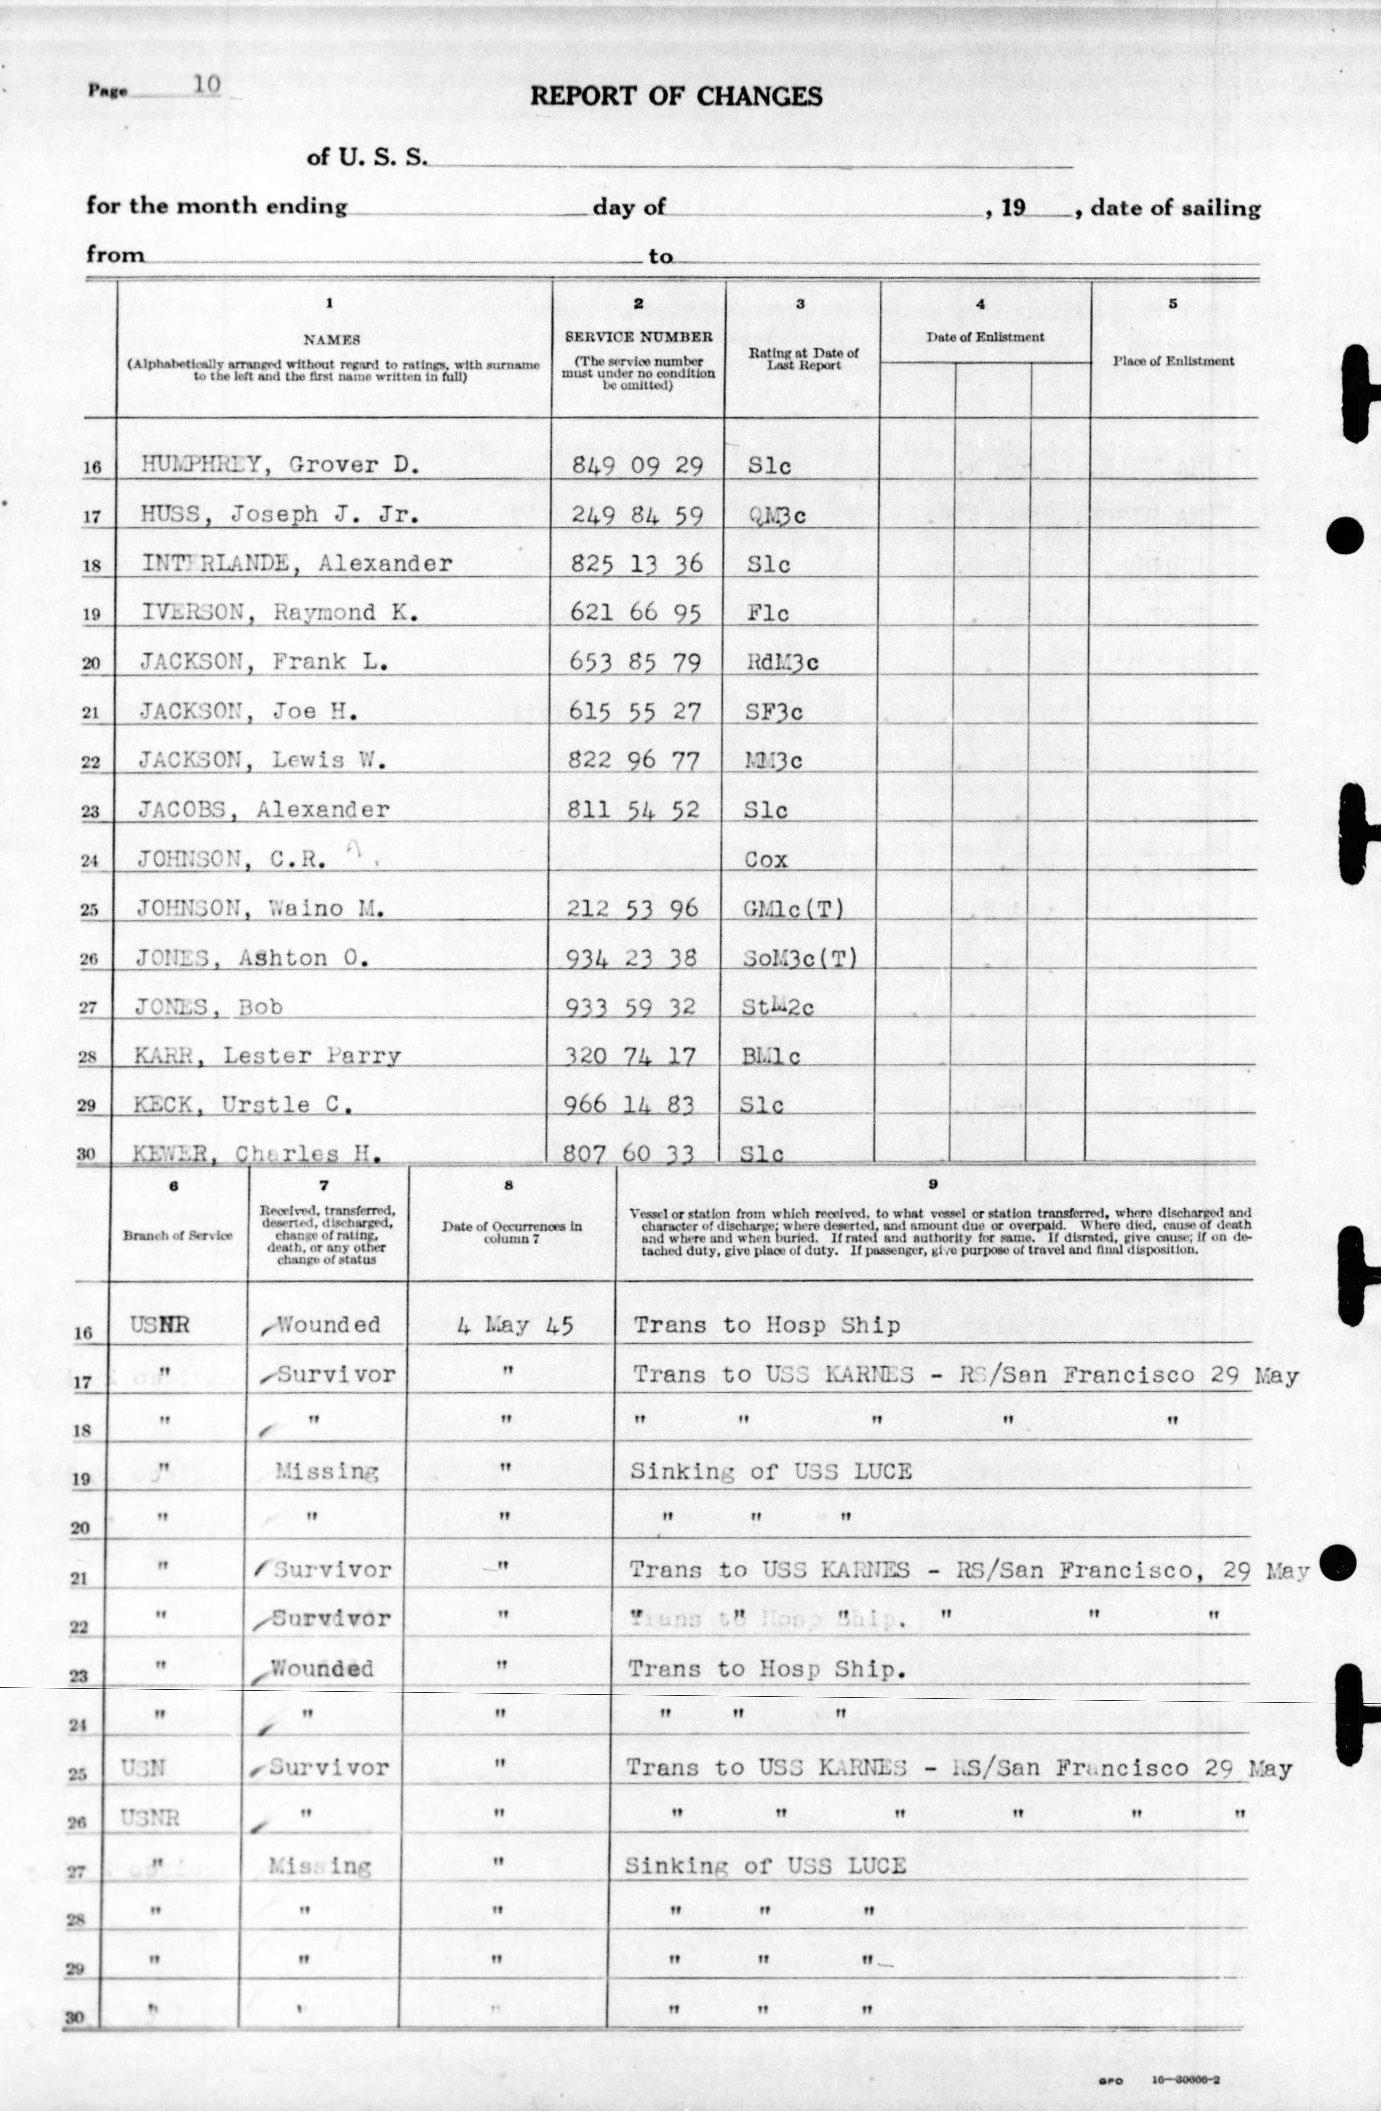 USS Luce final muster list dated June 19, 1945 after the ship was sunk May 4, 1945. Page 12 of 25.